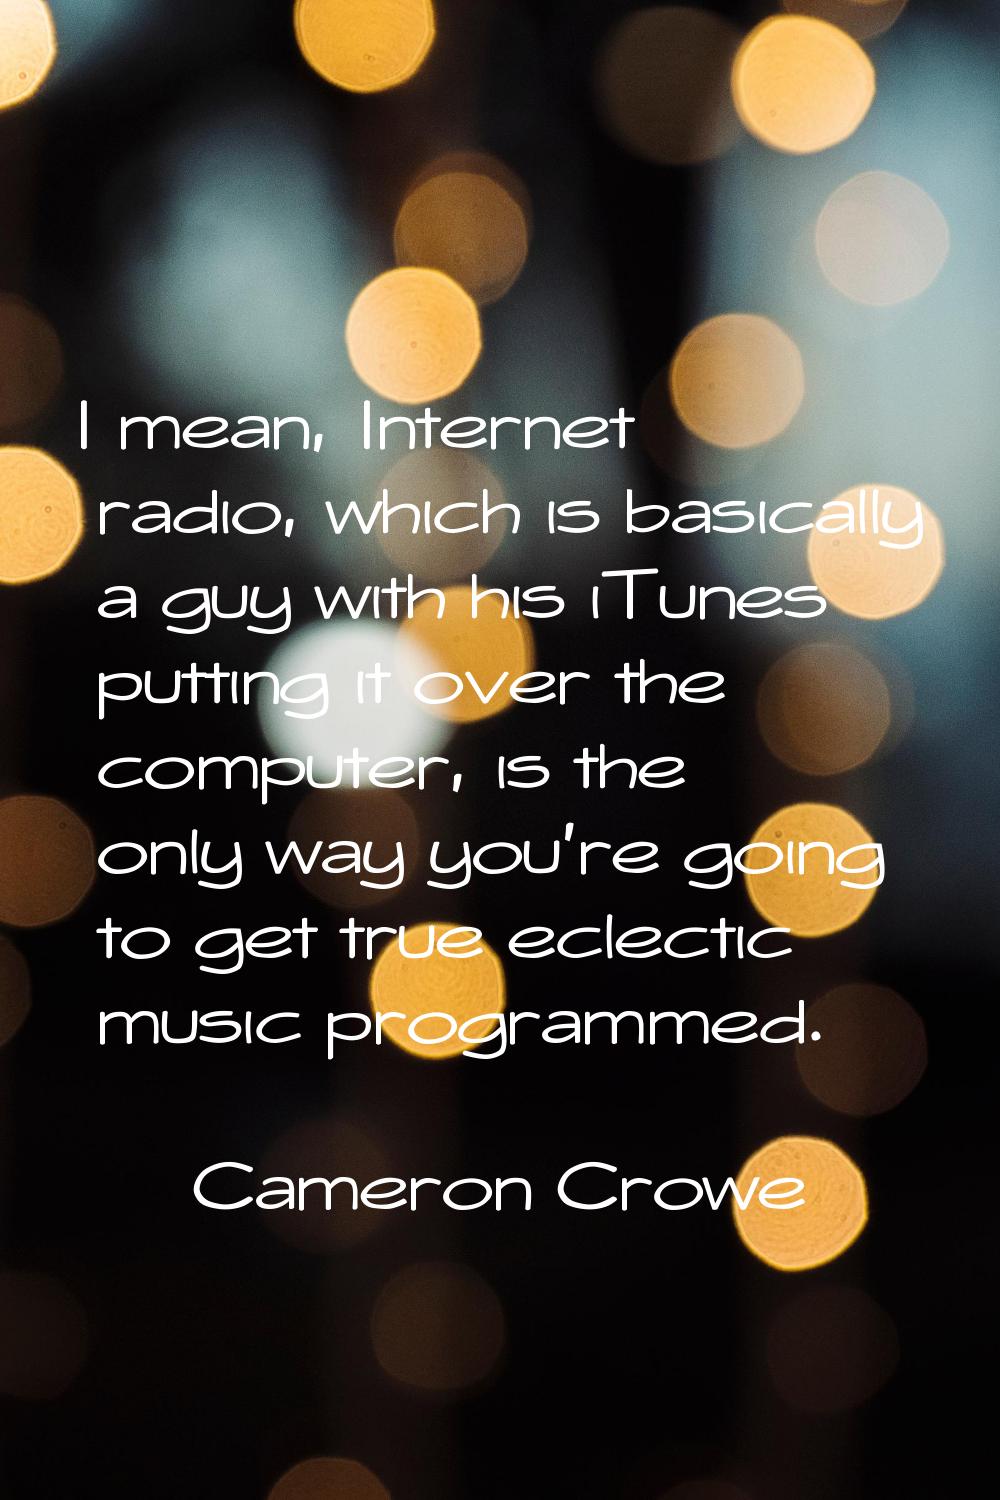 I mean, Internet radio, which is basically a guy with his iTunes putting it over the computer, is t